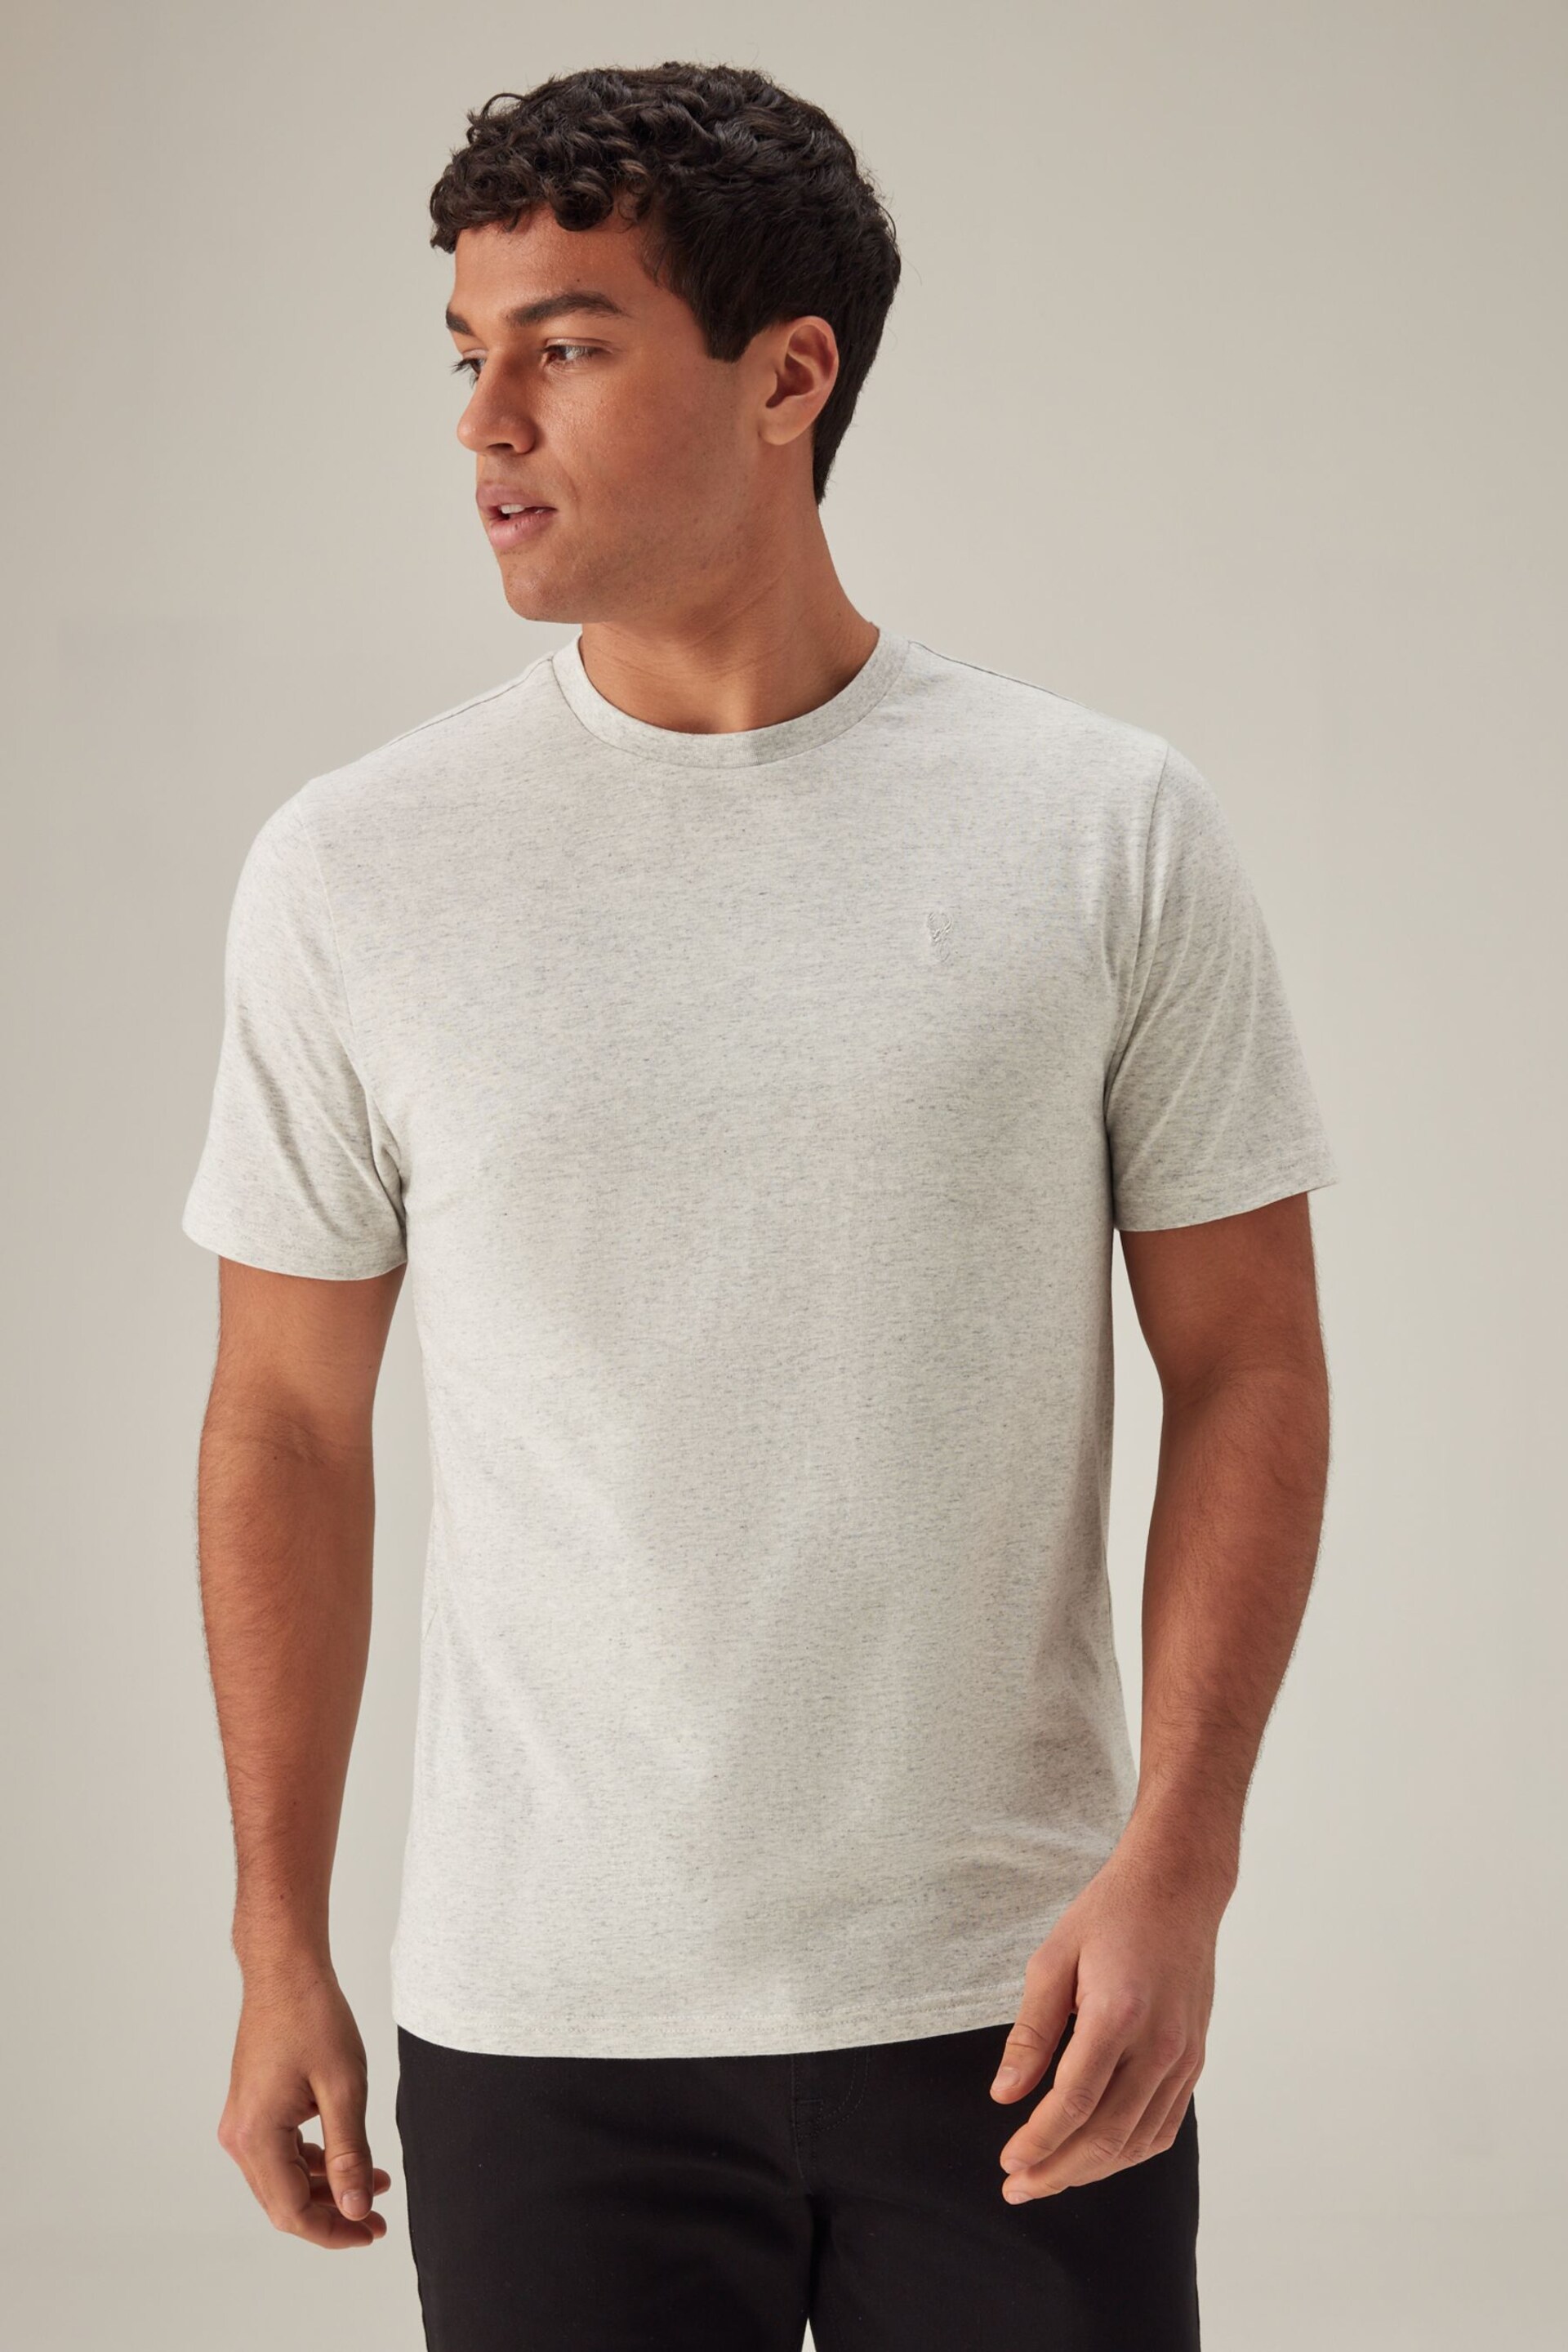 Grey Single Stag Marl T-Shirt - Image 3 of 8